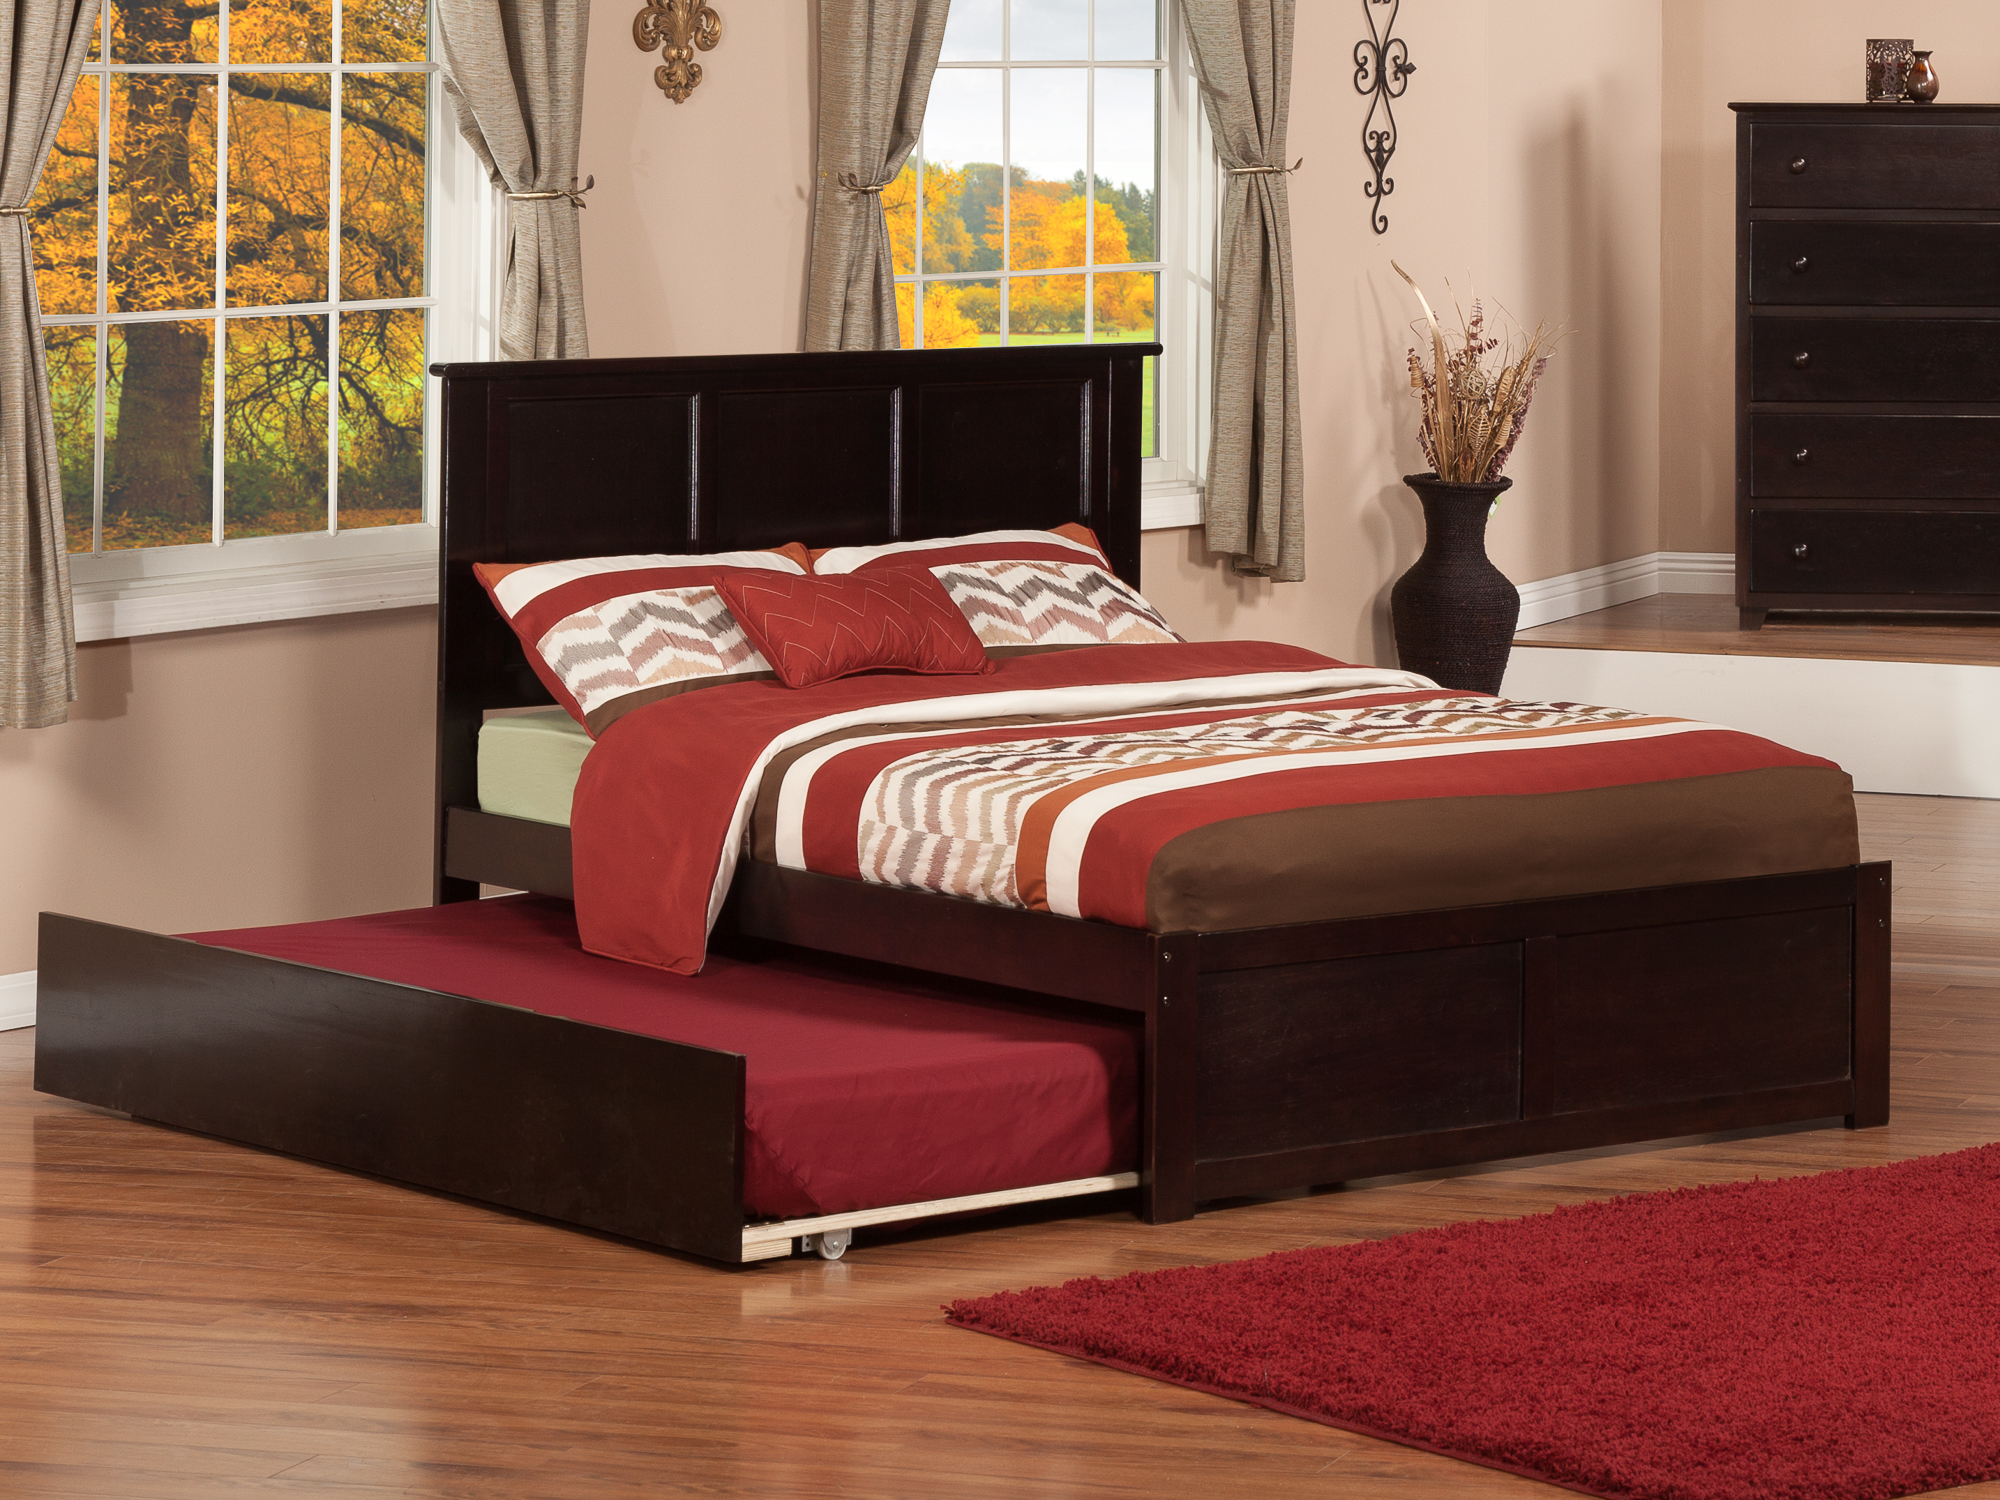 Madison Platform Bed with Flat Panel Foot Board and Twin Size Urban Trundle Bed in Multiple Colors and Sizes - image 2 of 4